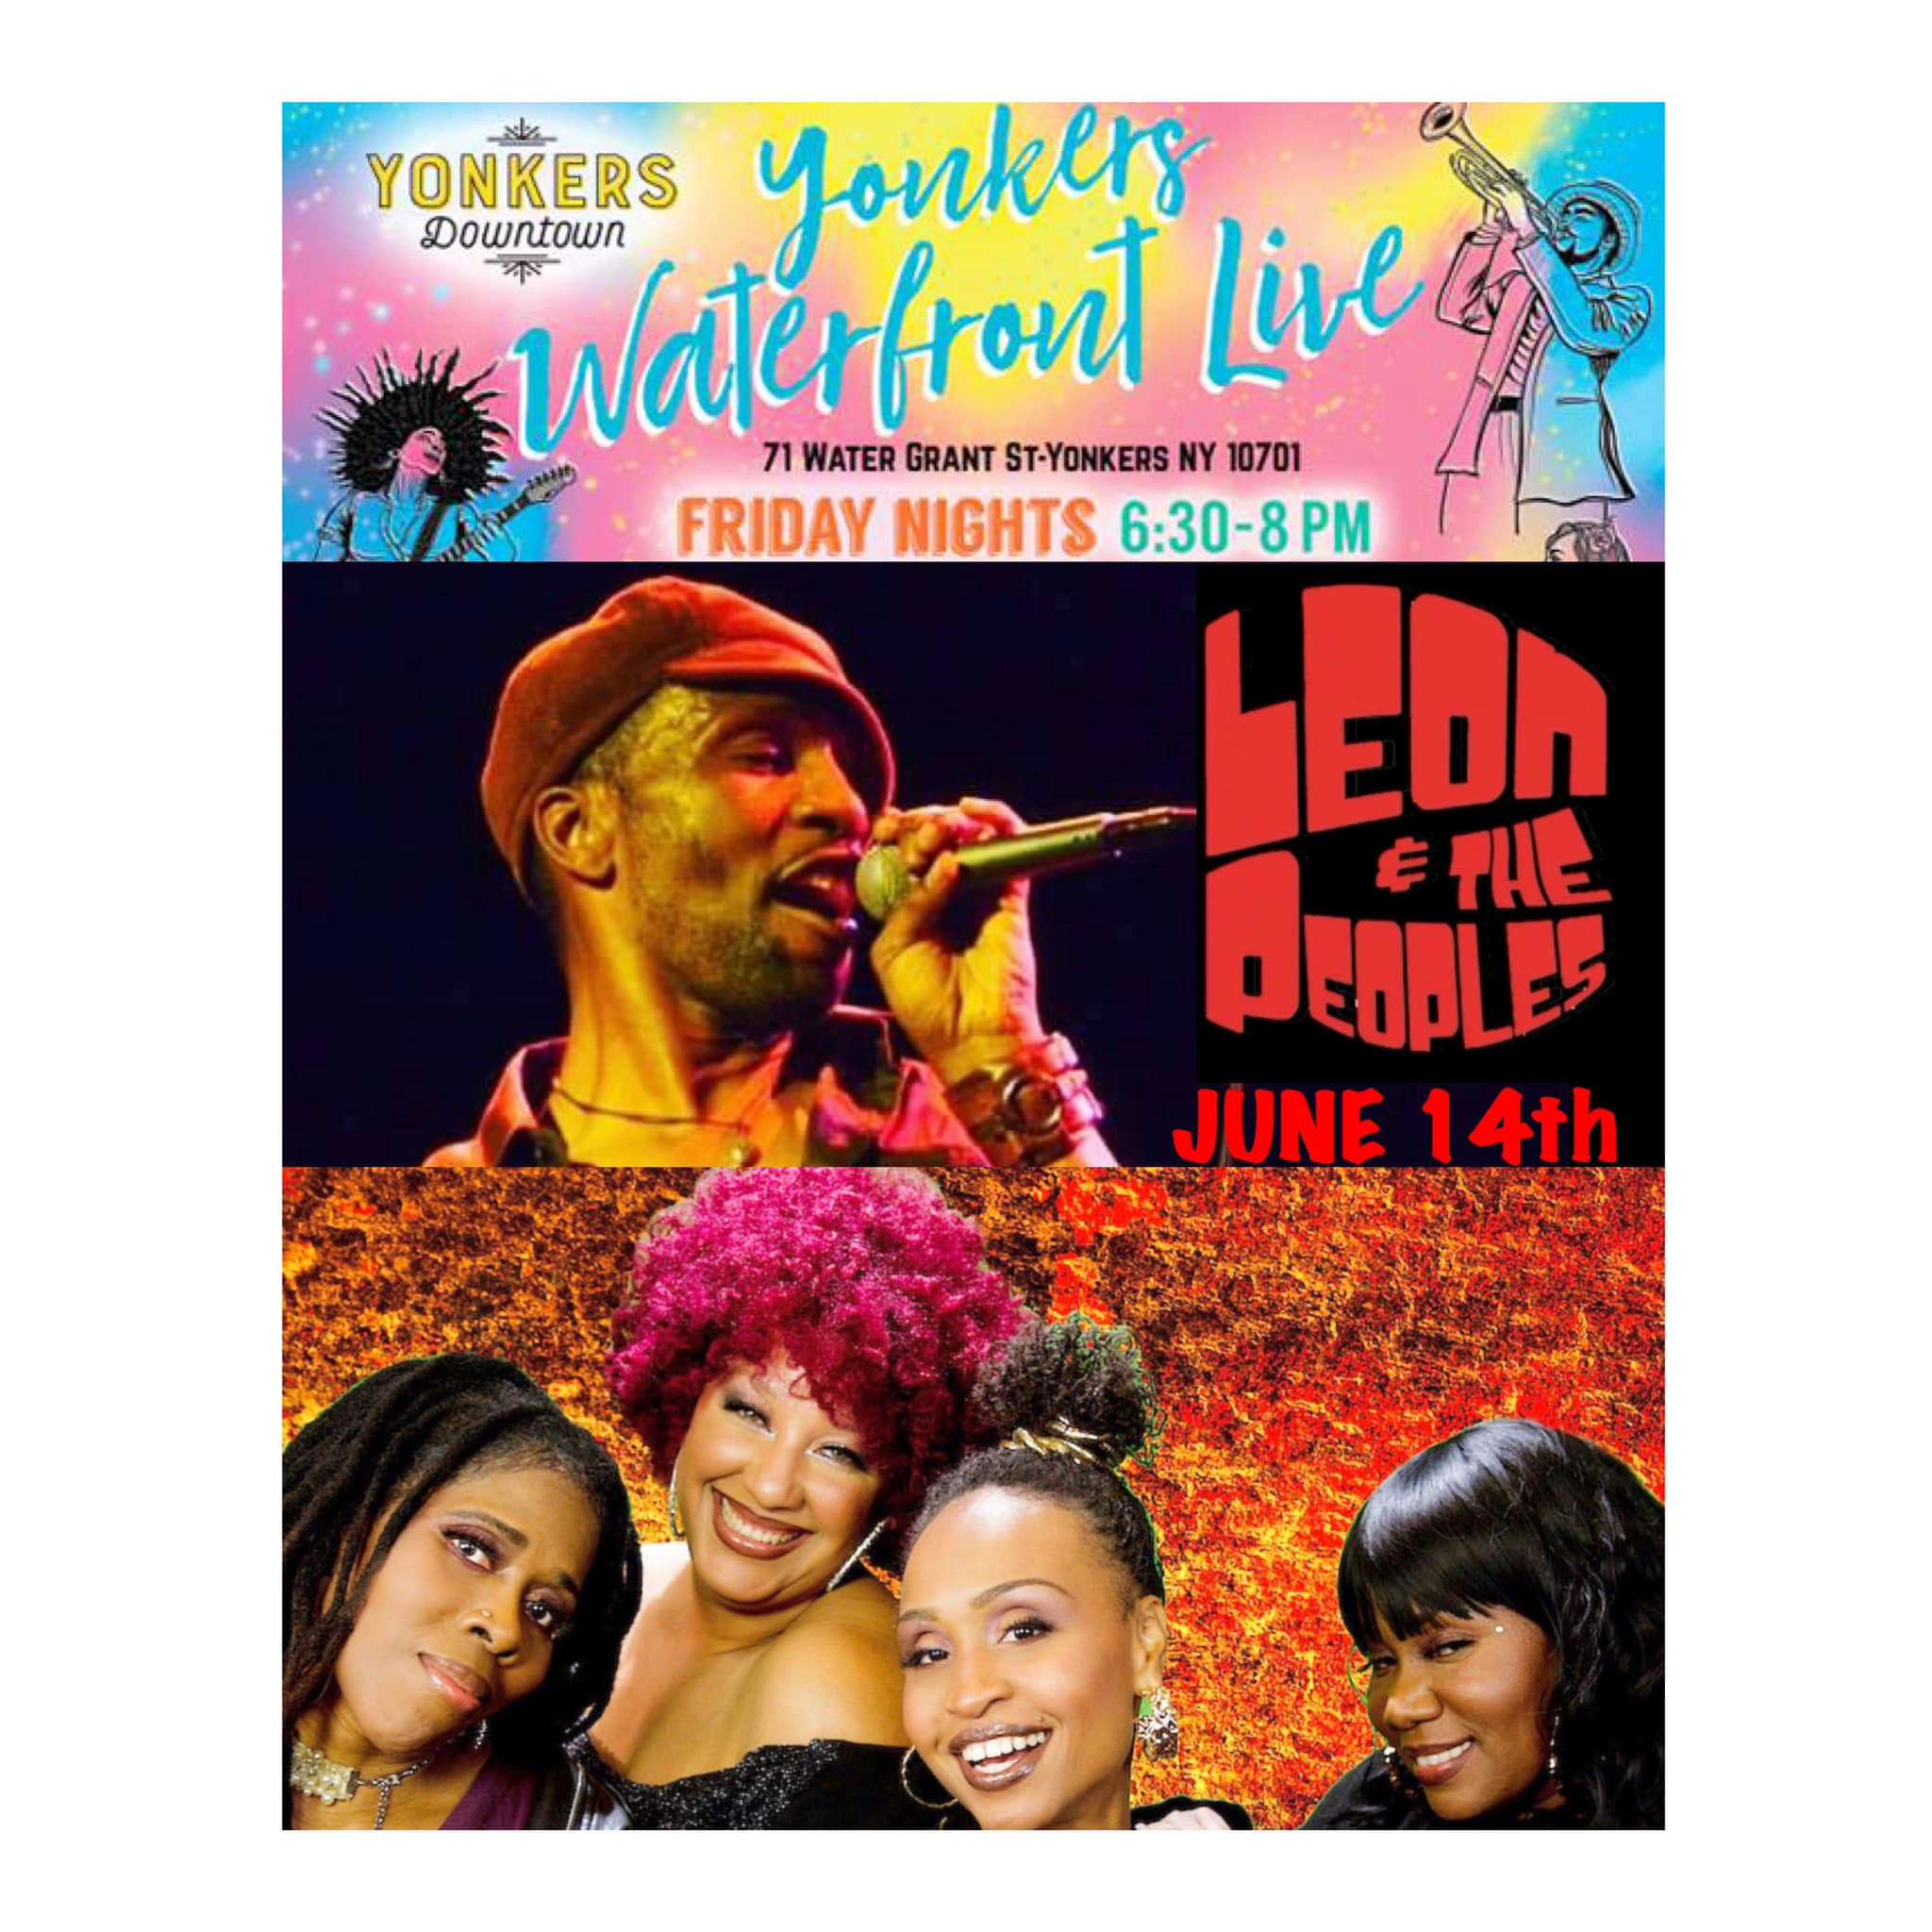 Yonkers Waterfront Live Concert Series Presents Leon & The Peoples 6/14/26 @ 6:30 PM